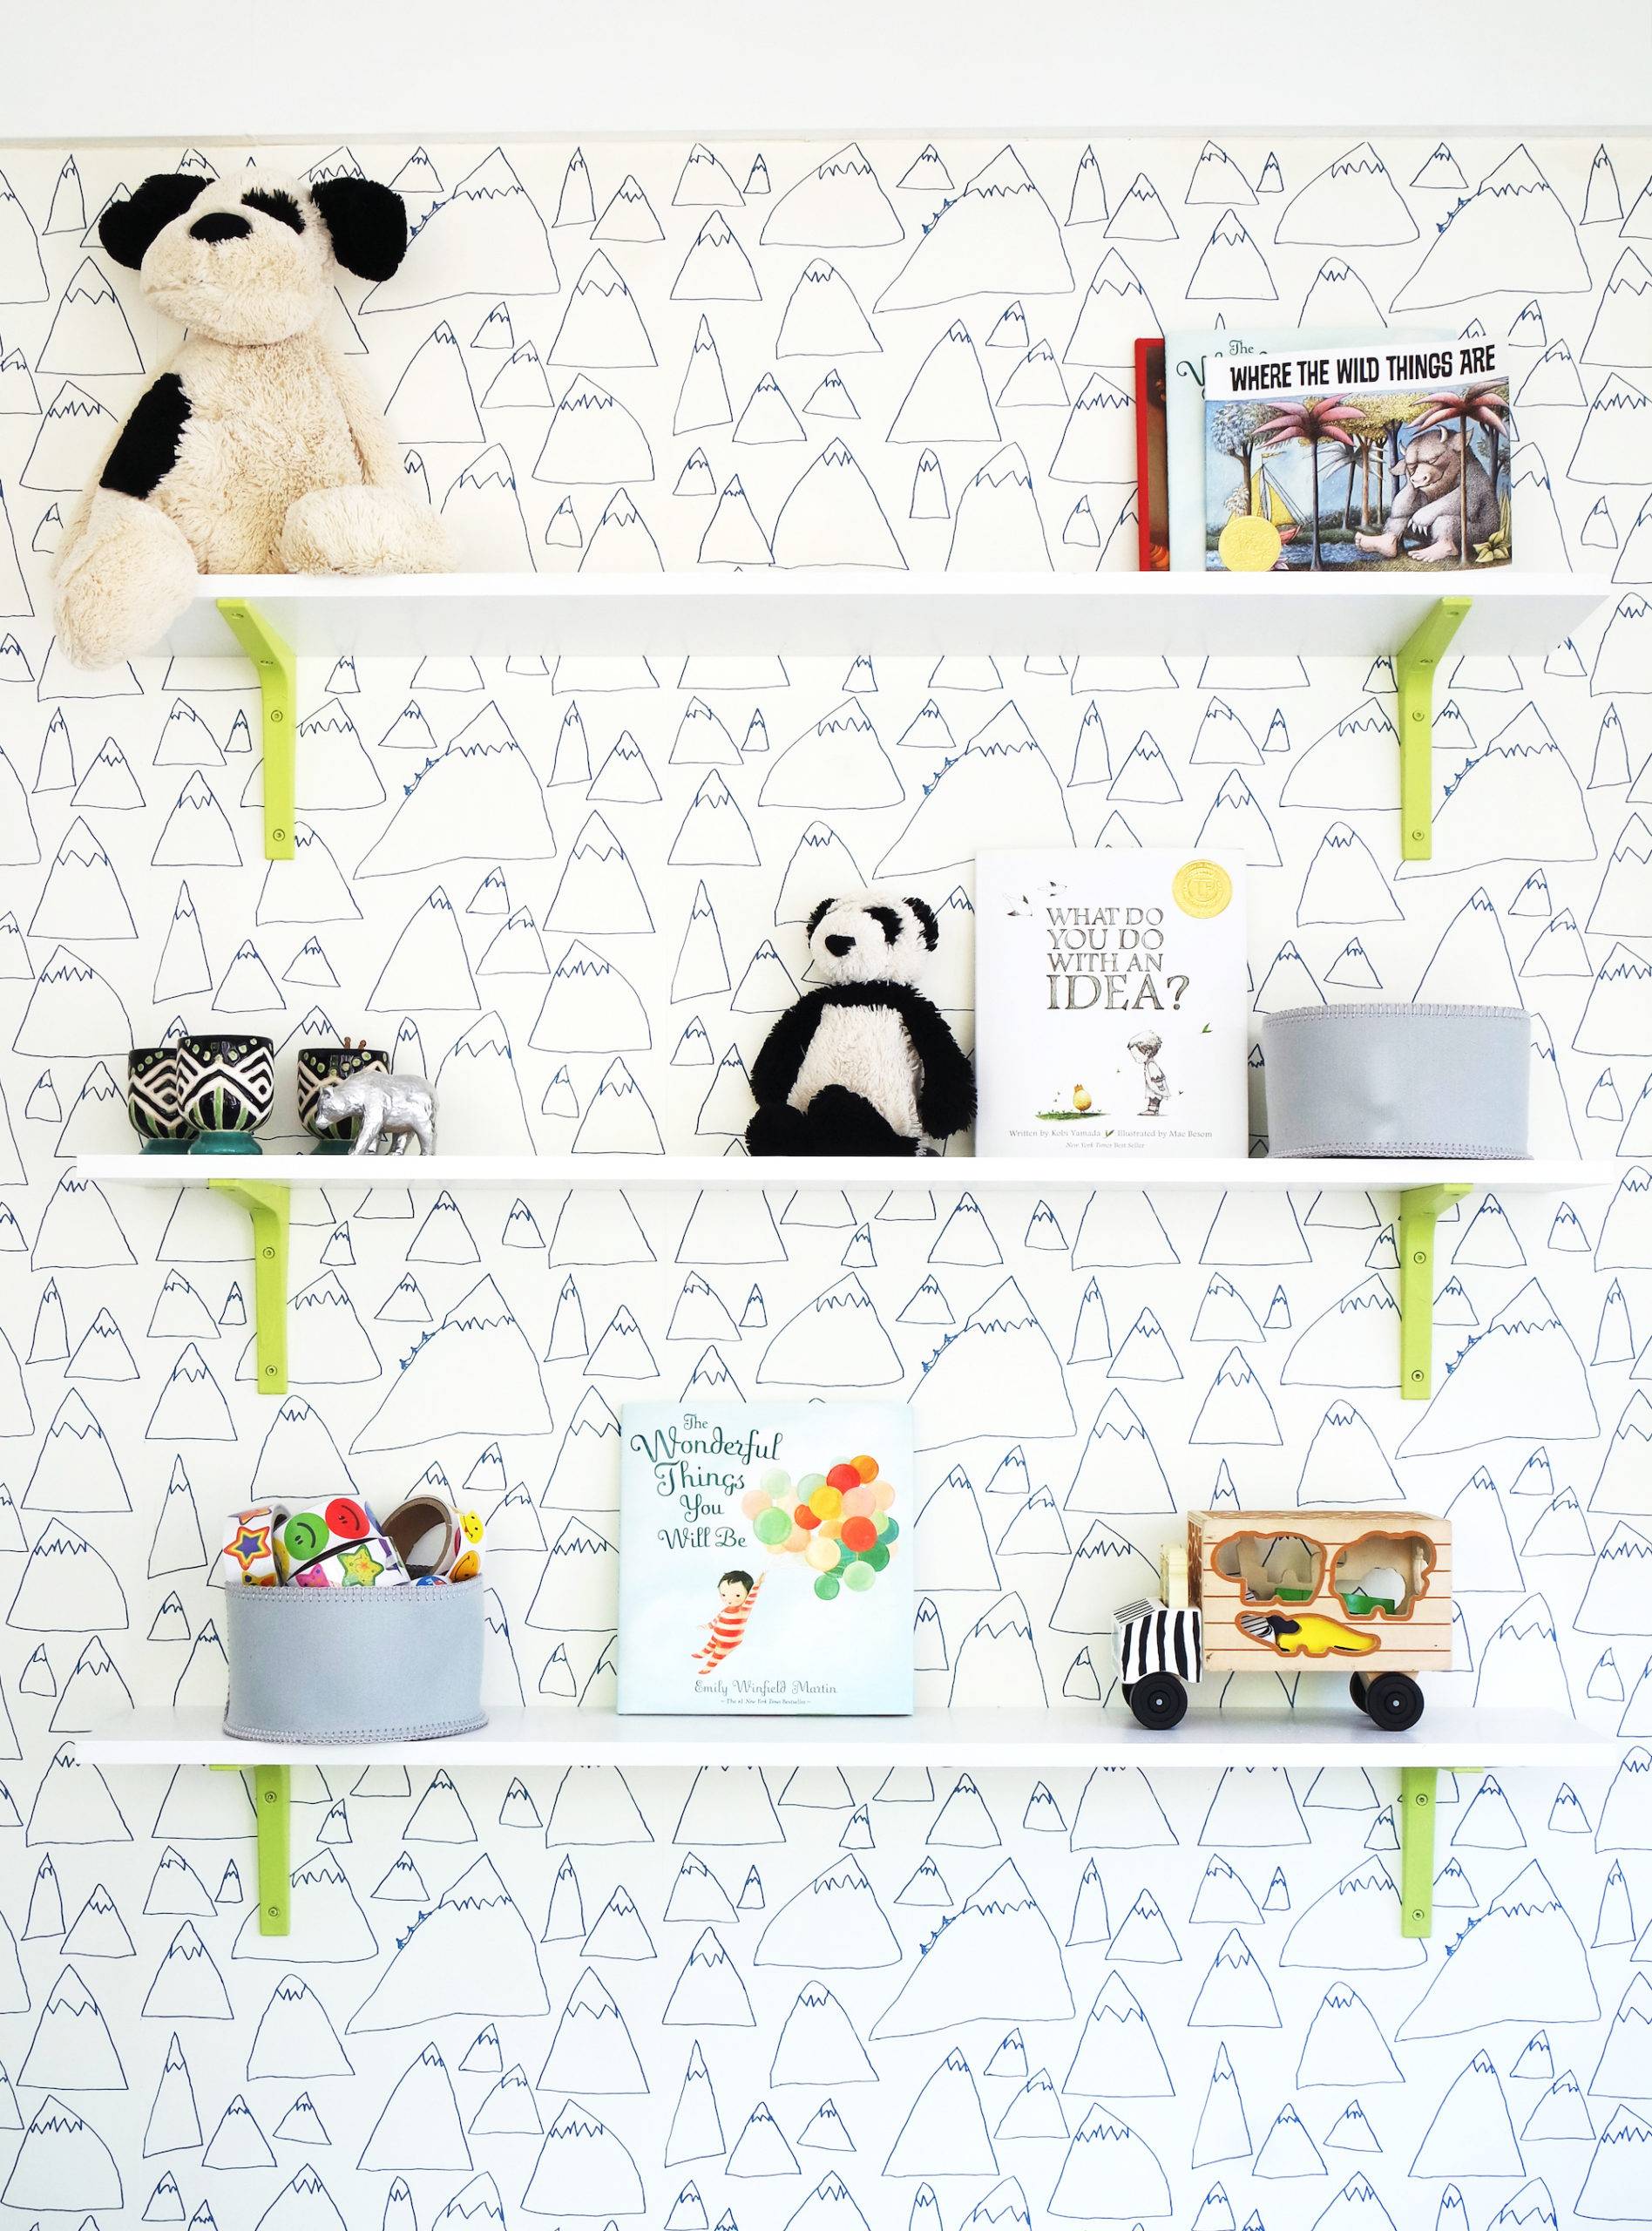 Pops of lime green pair will illustrative wallpaper create the perfect playroom. Click through to see the full reveal!